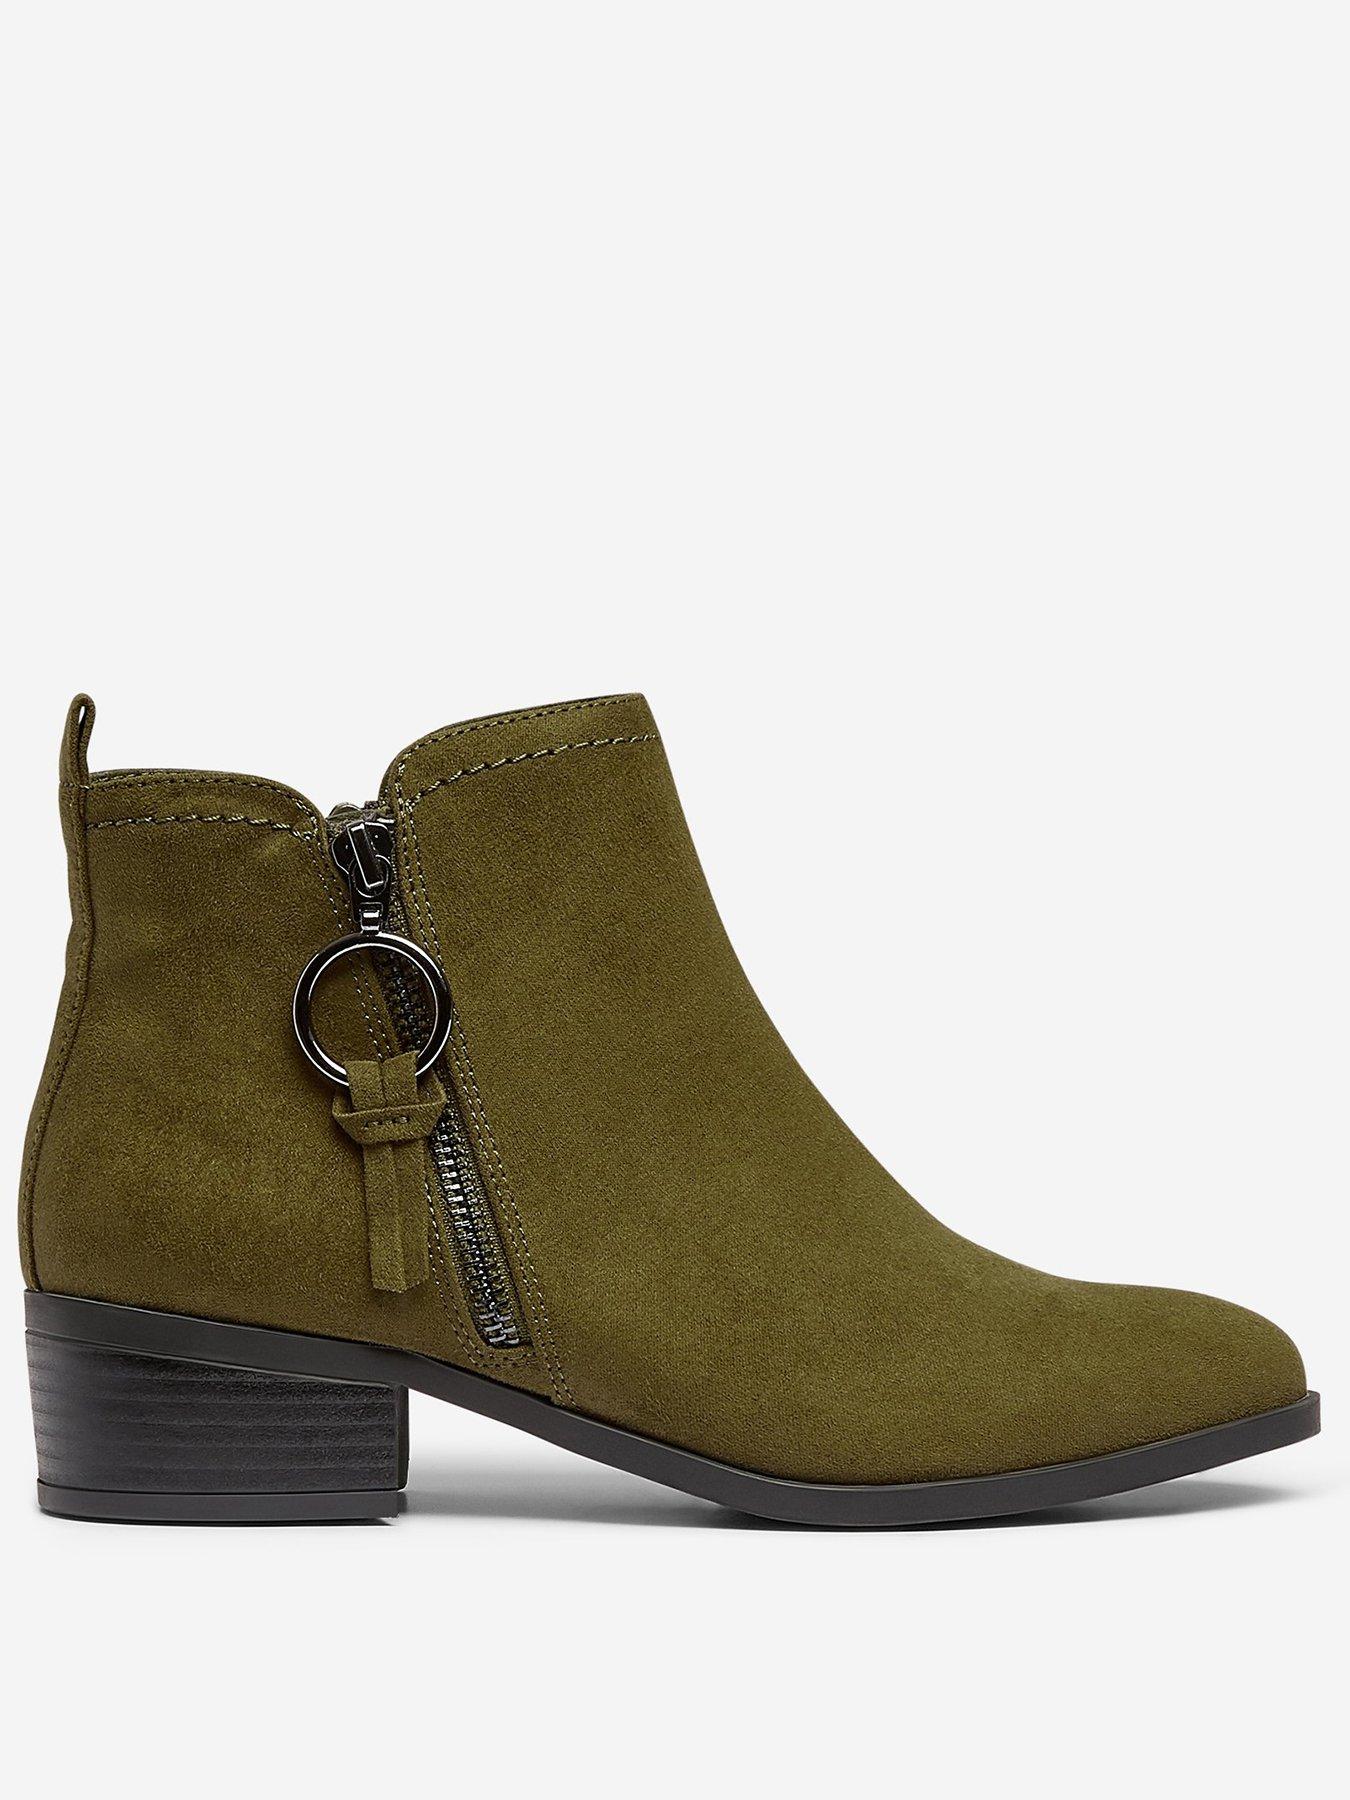 dorothy perkins wide fit ankle boots